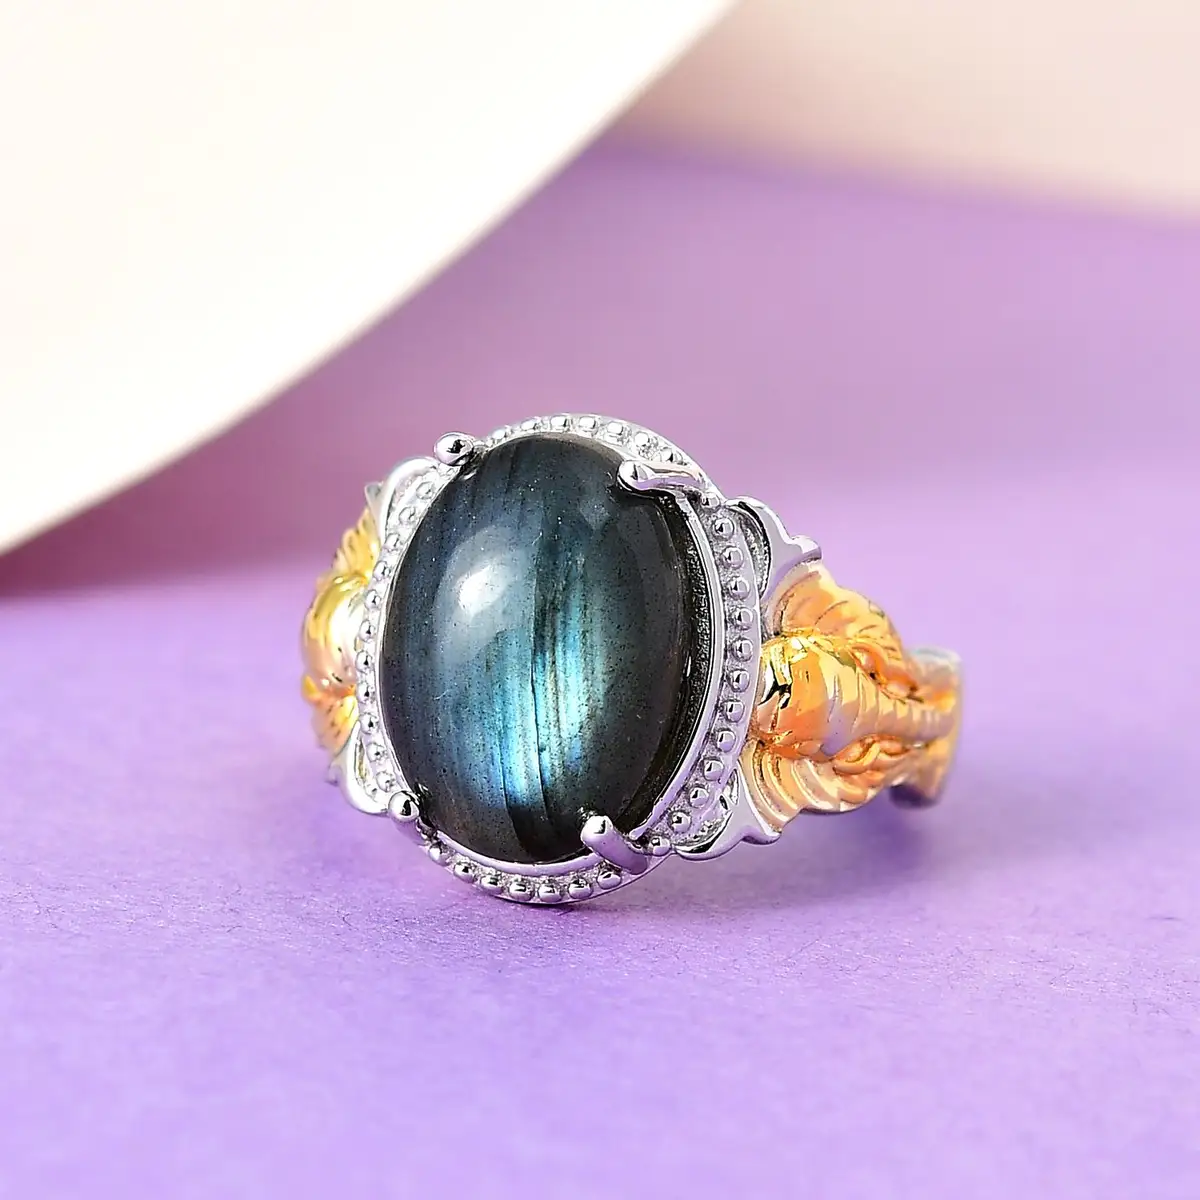 Leo Ring Leo Birthstone Labradorite Solitaire Ring in 18K YG Plated and Platinum Bond 6.35 ctw